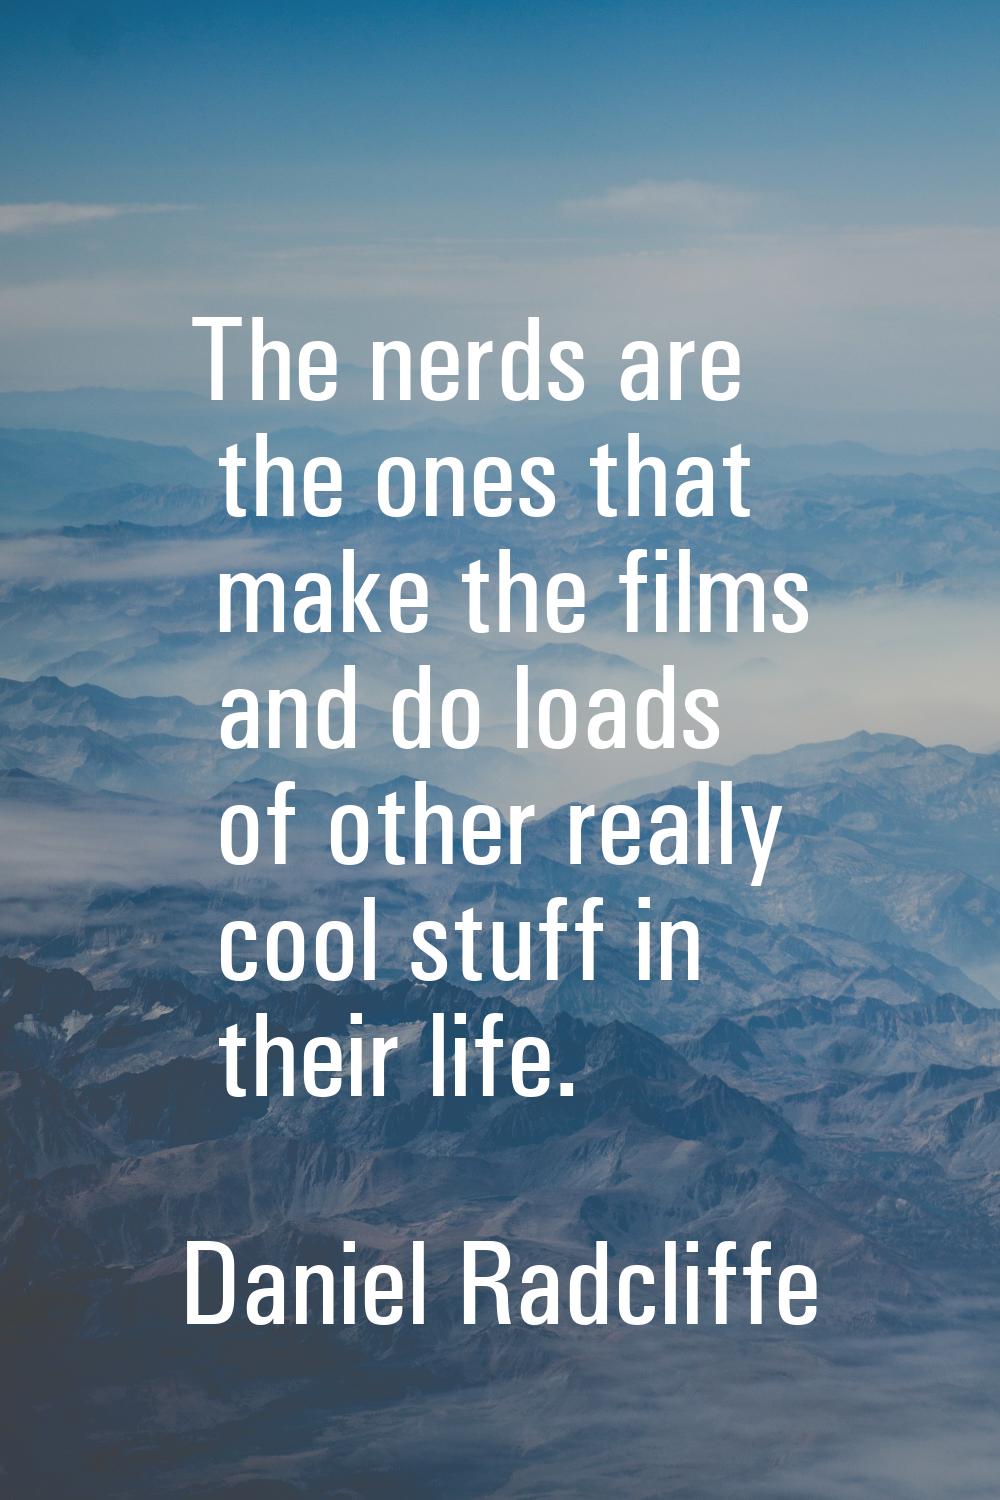 The nerds are the ones that make the films and do loads of other really cool stuff in their life.